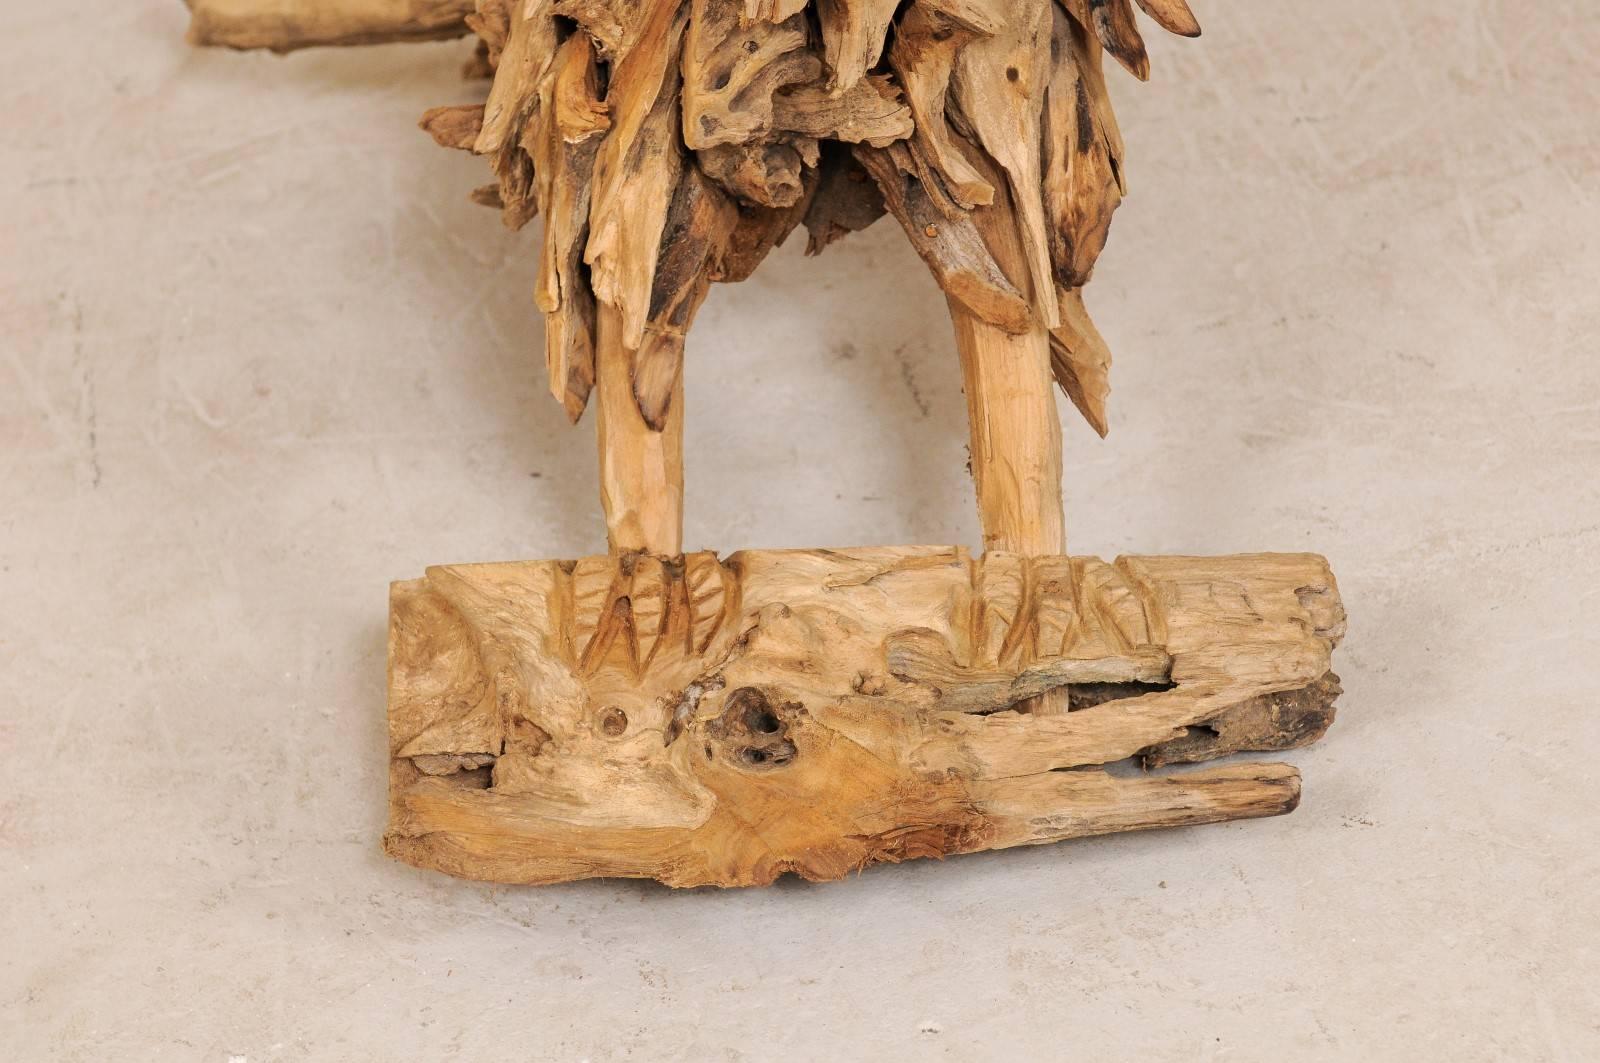 Hand-Carved  Eagle Sculpture Artisan-Crafted from Driftwood, 4.5 Ft Tall w/ 6+ Ft Wing-Span For Sale